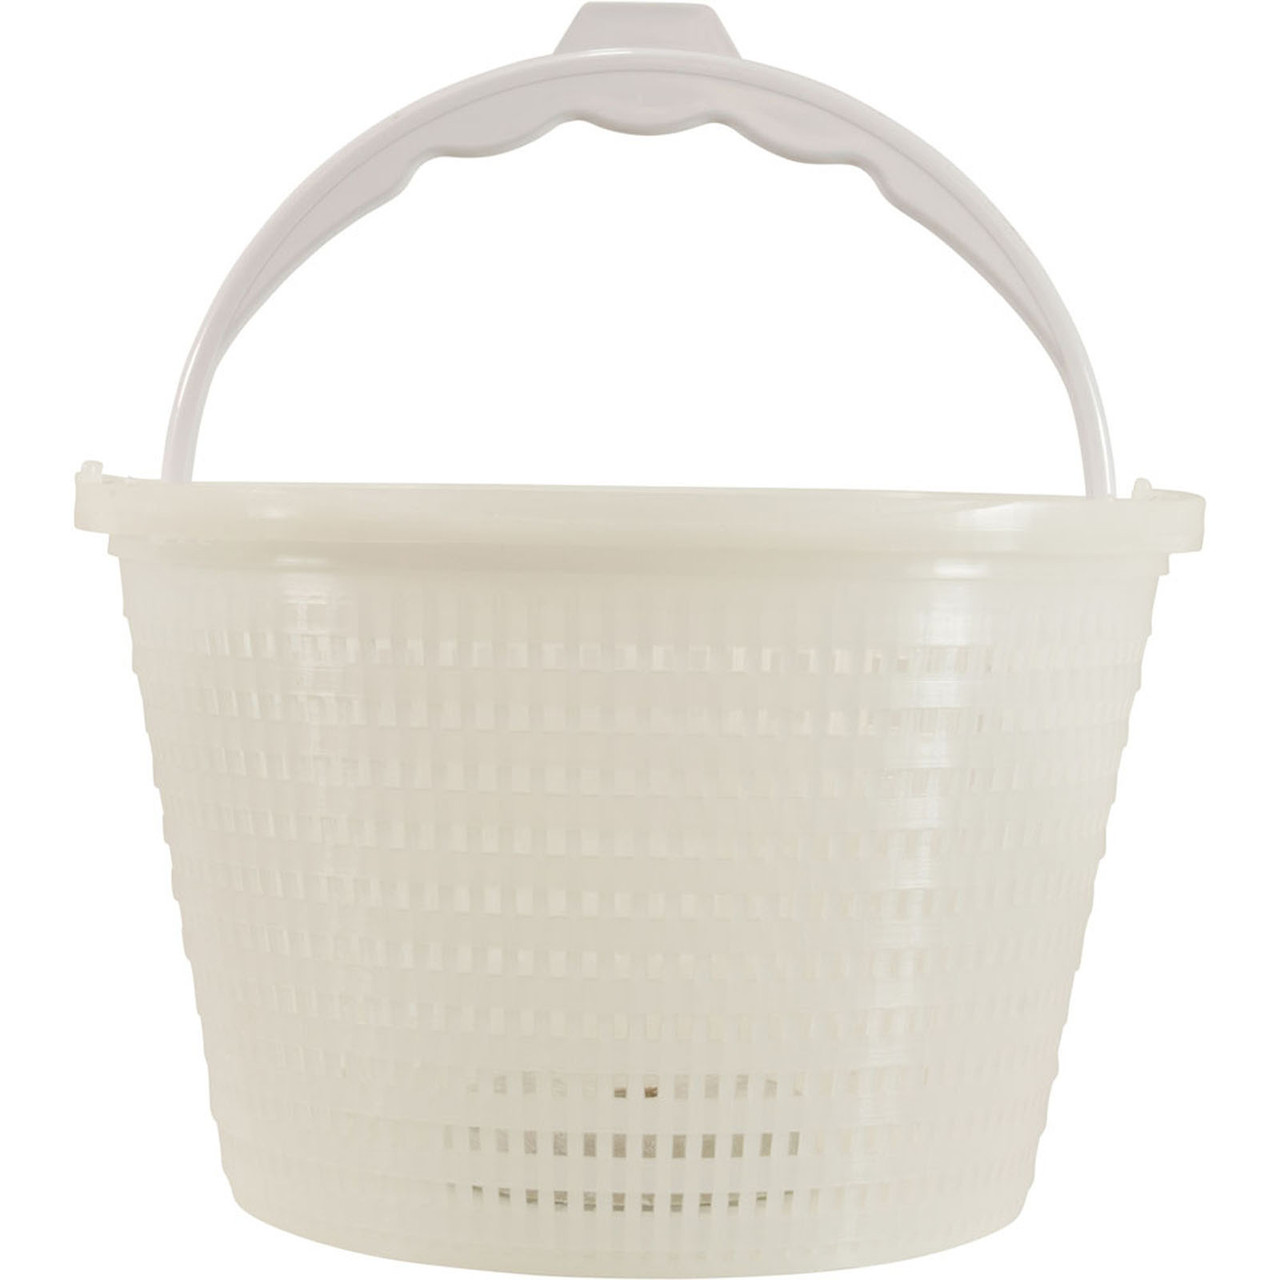 Basket Assembly with Handle